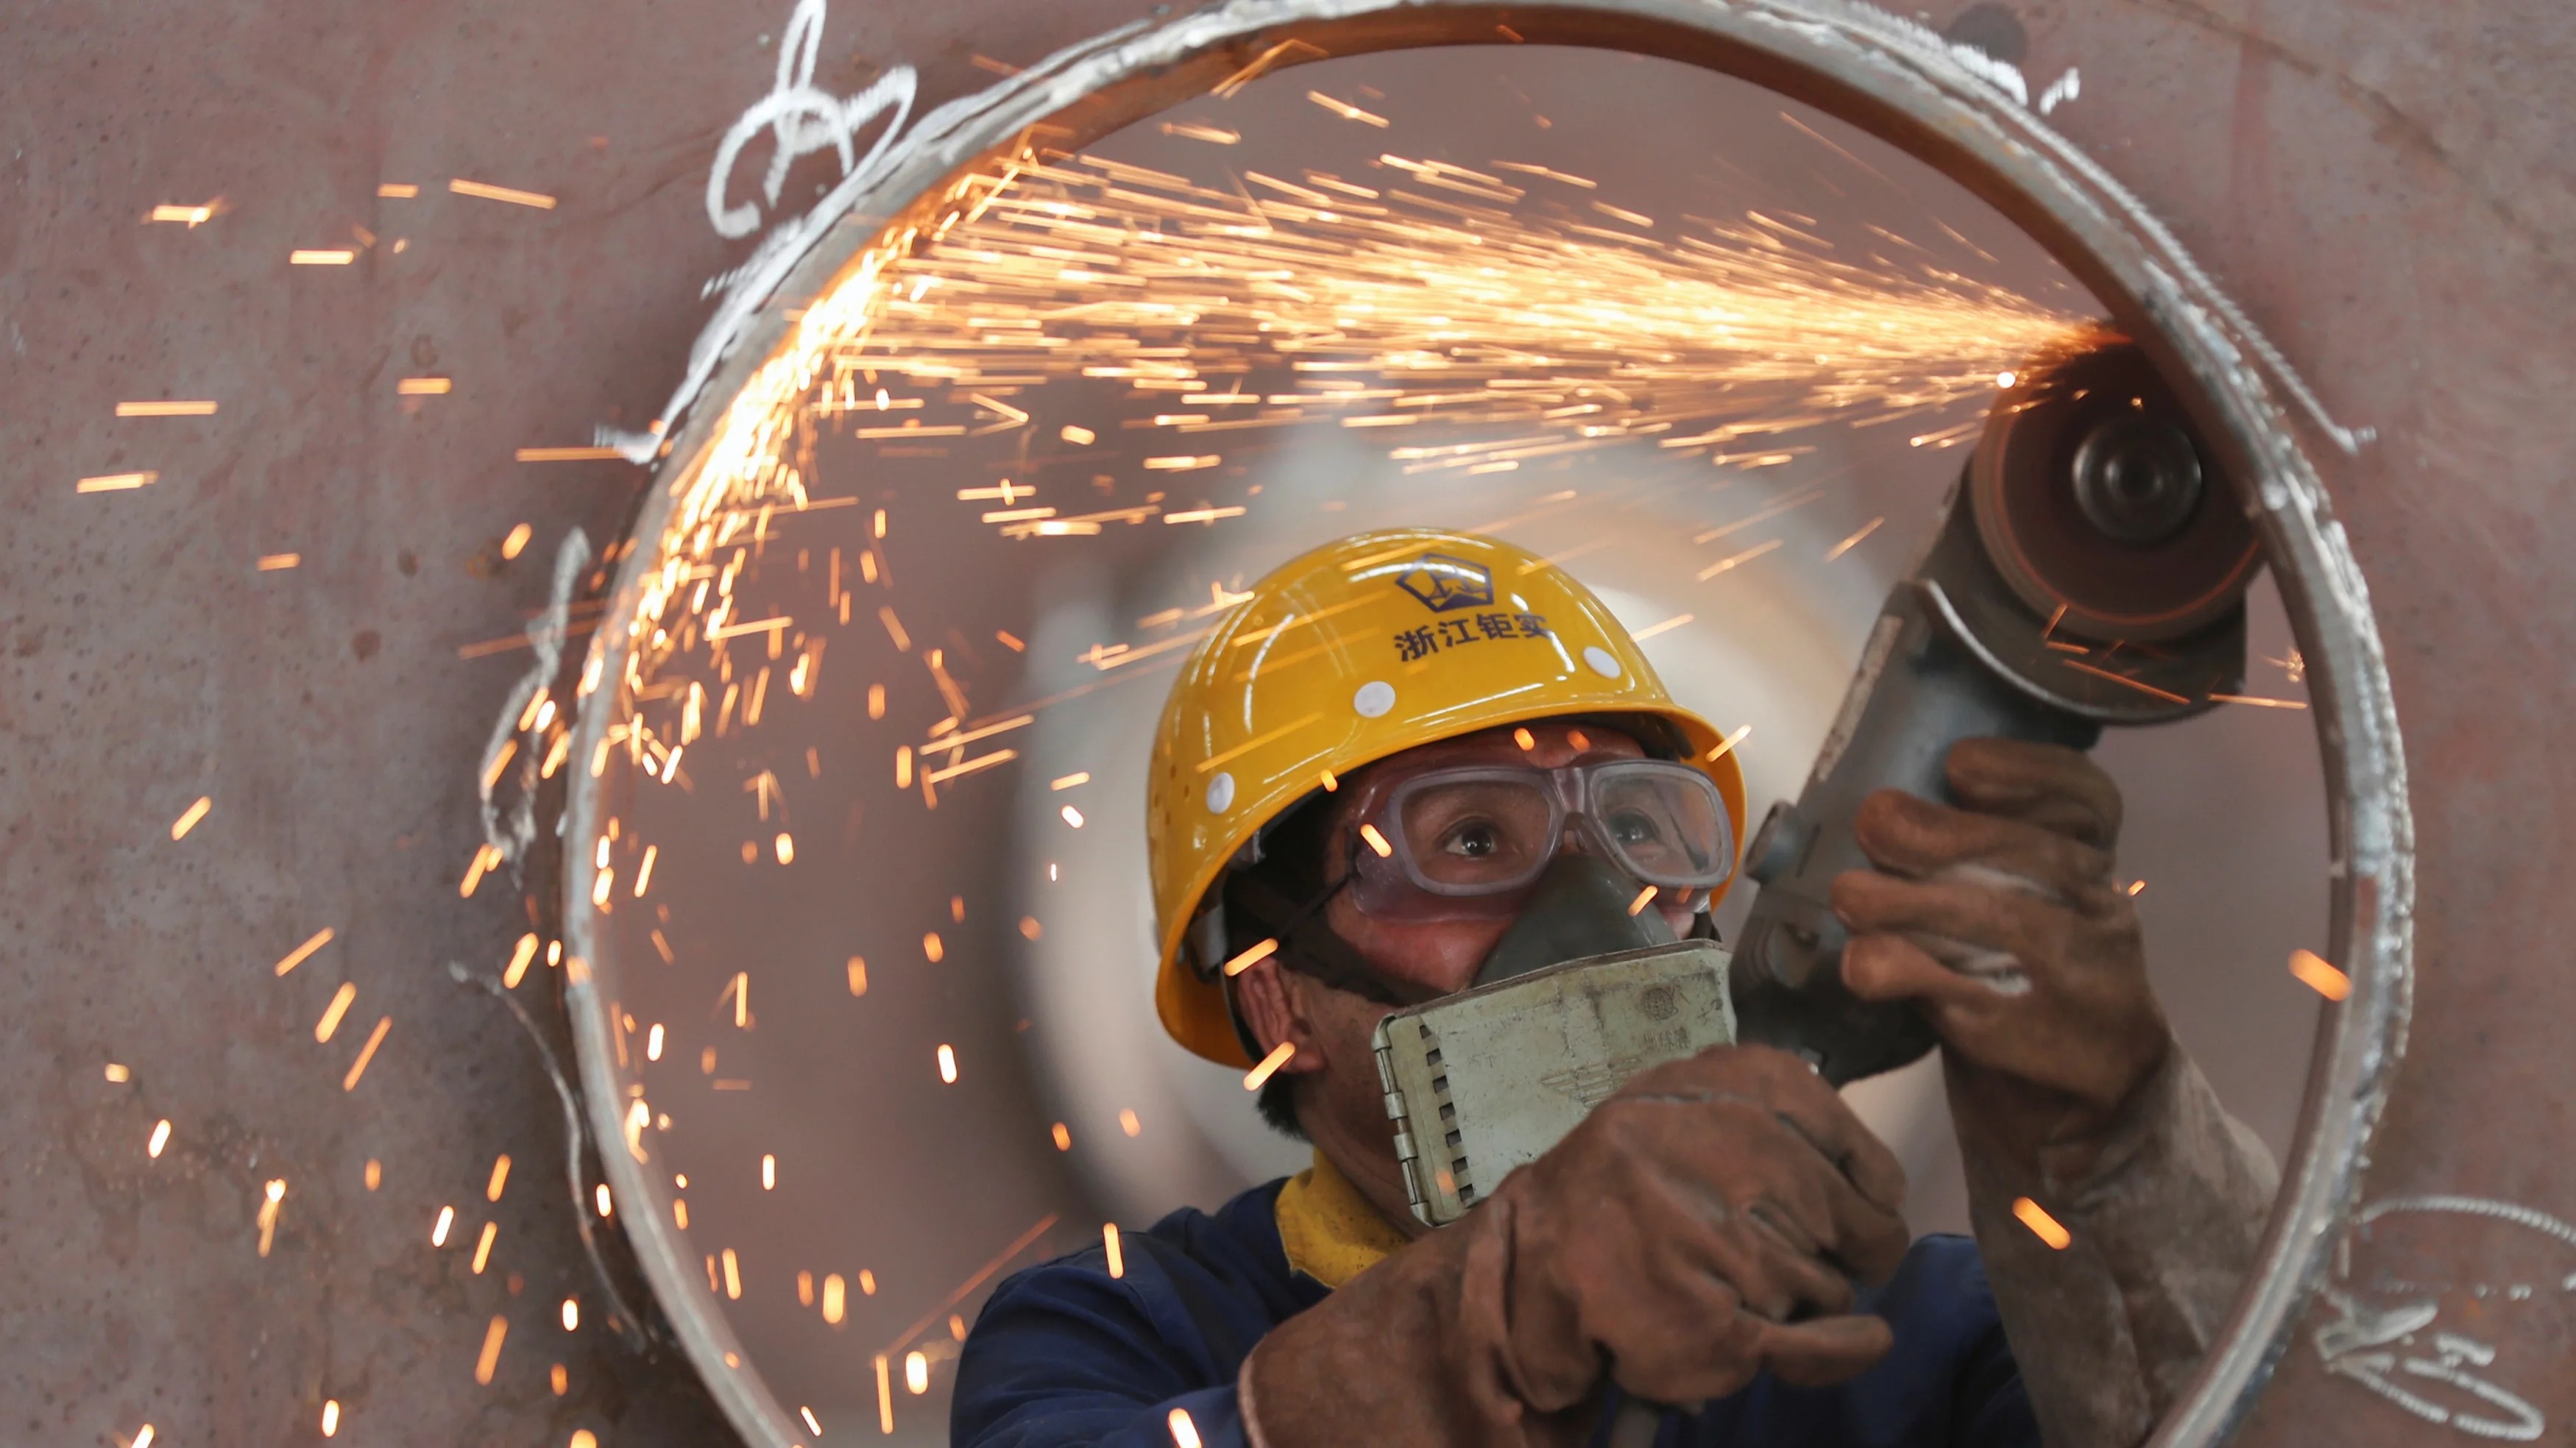 An employee works on a production line manufacturing steel structures at a factory in Huzhou